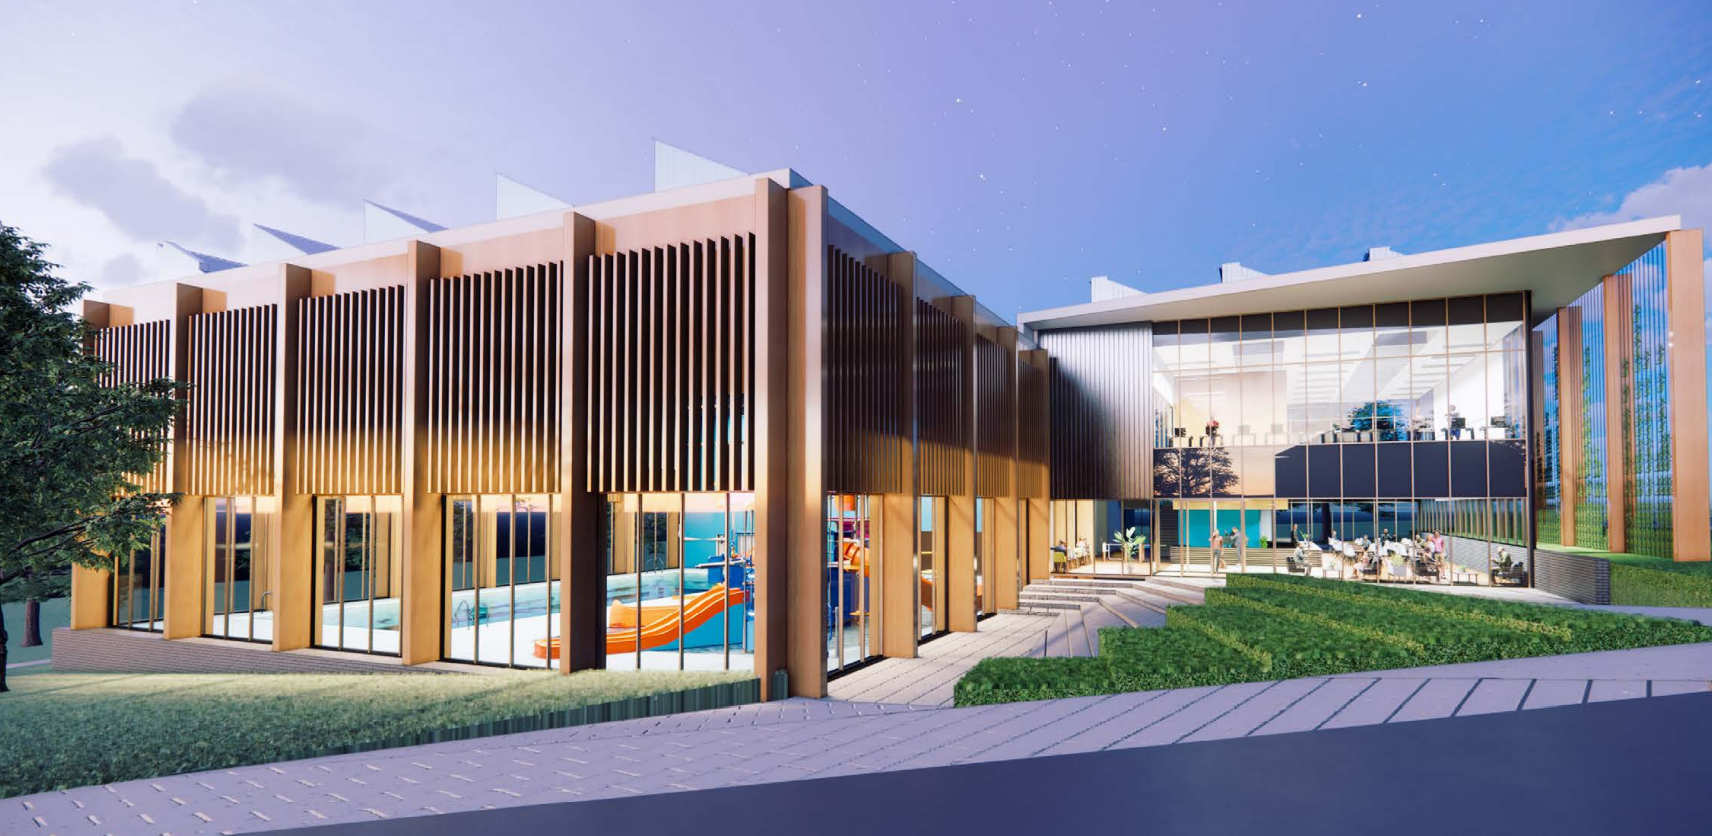 A CGI image of what Rainham's new family friendly sports centre will look like. A large building with large windows to look into the pool and stairs to the right.